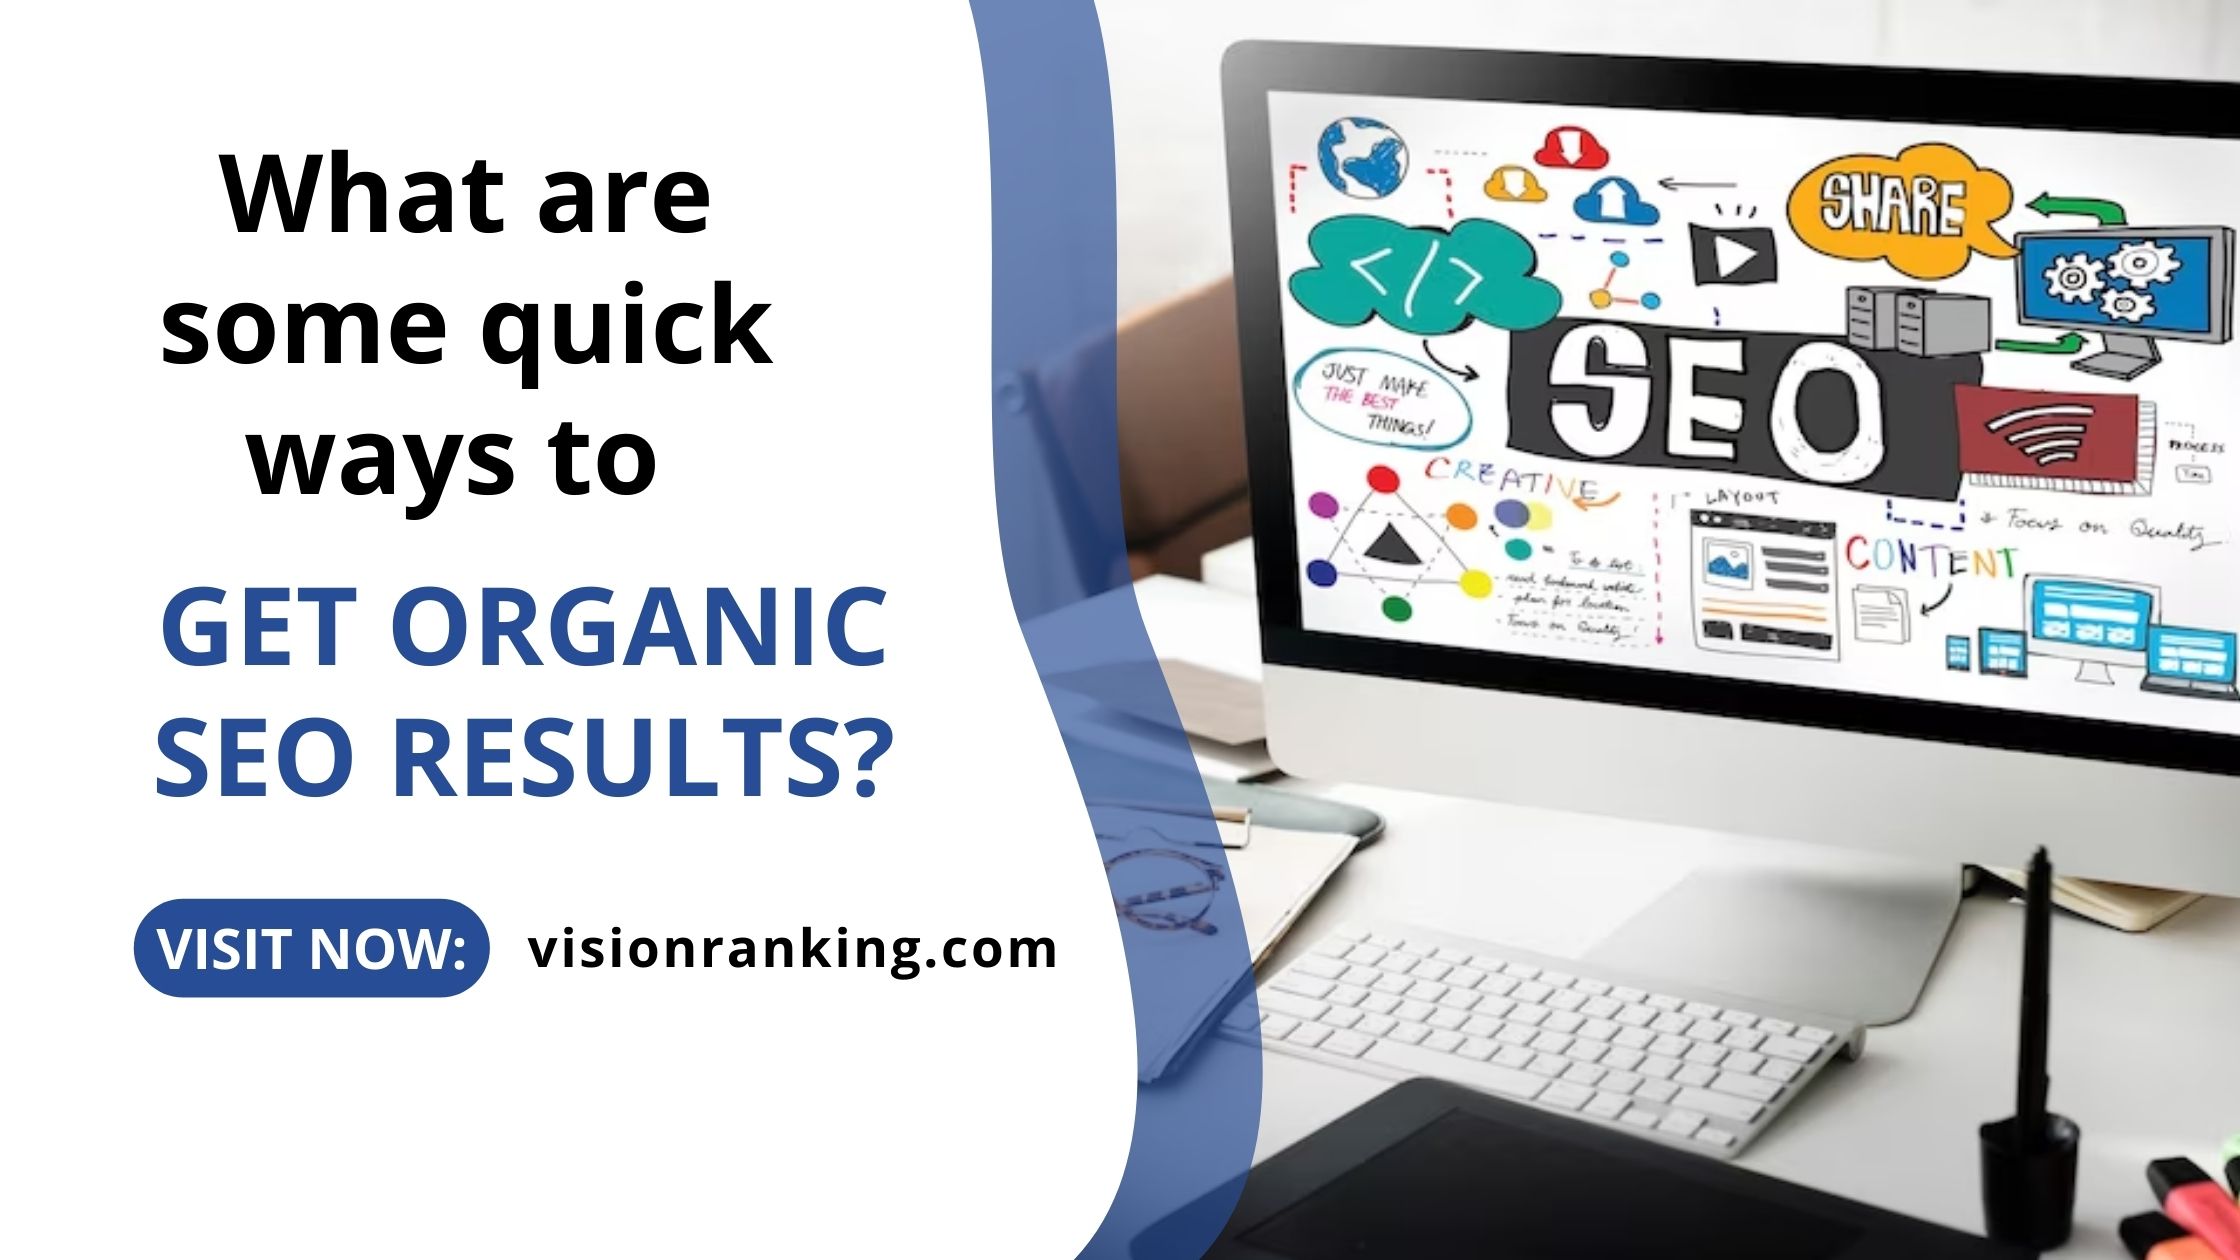 What are some quick ways to get organic SEO results?